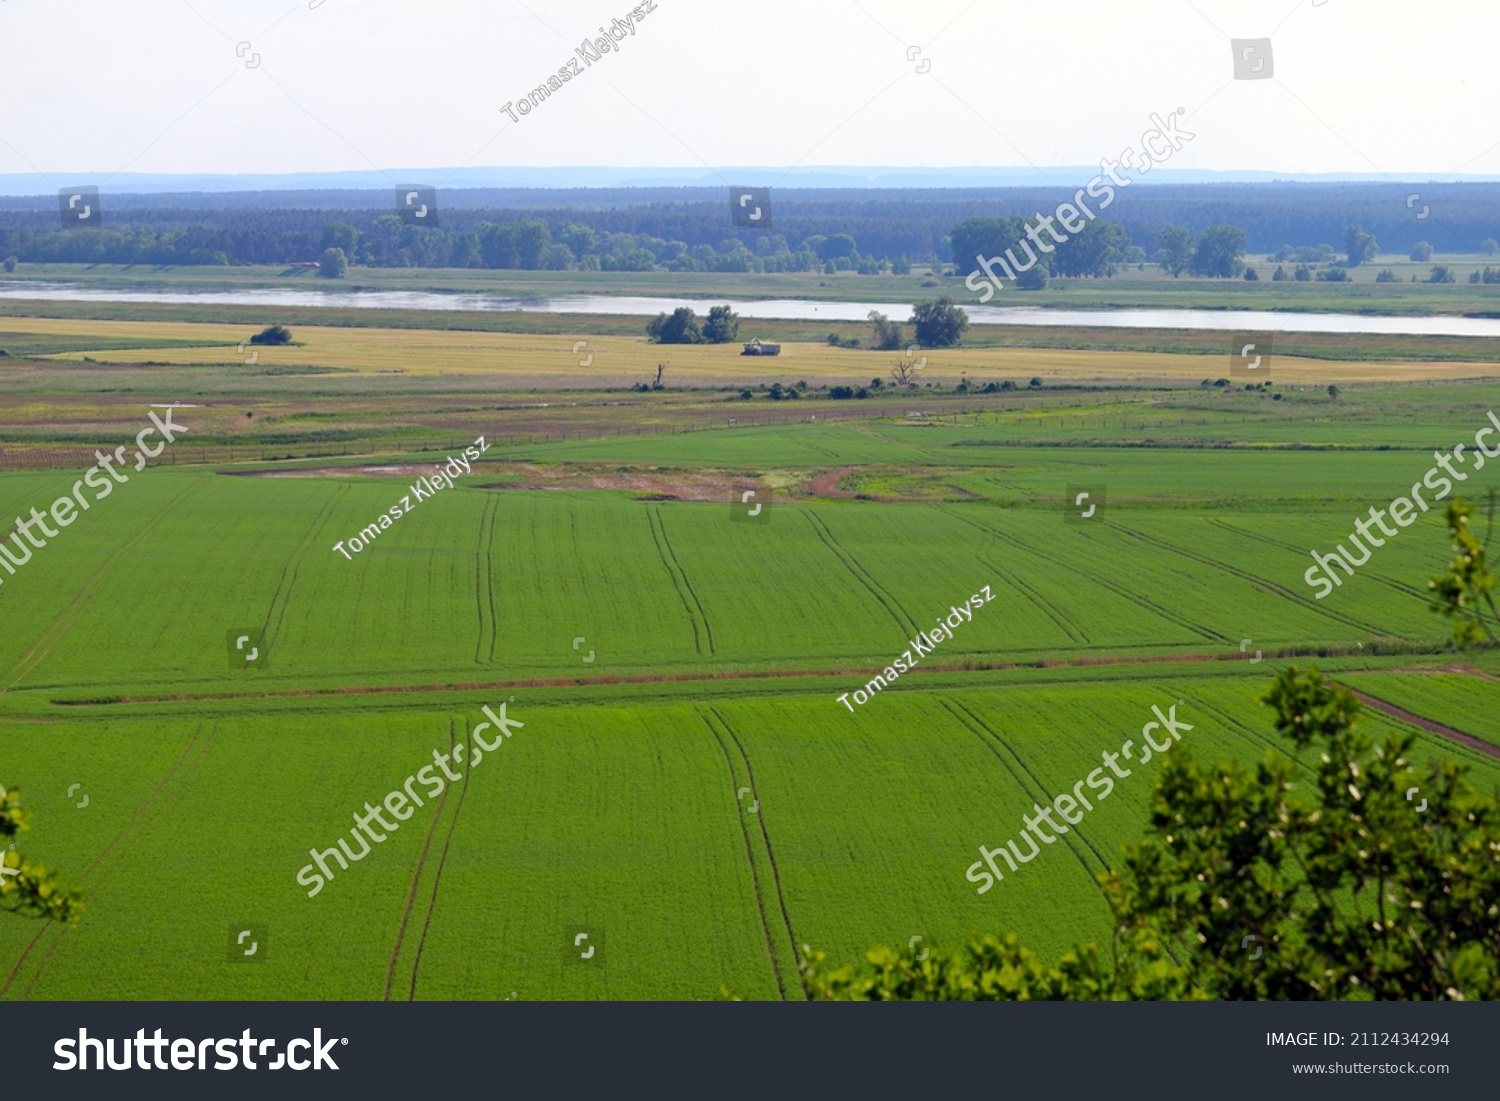 The agricultural landscape of a large lowland European river - the Oder. #2112434294